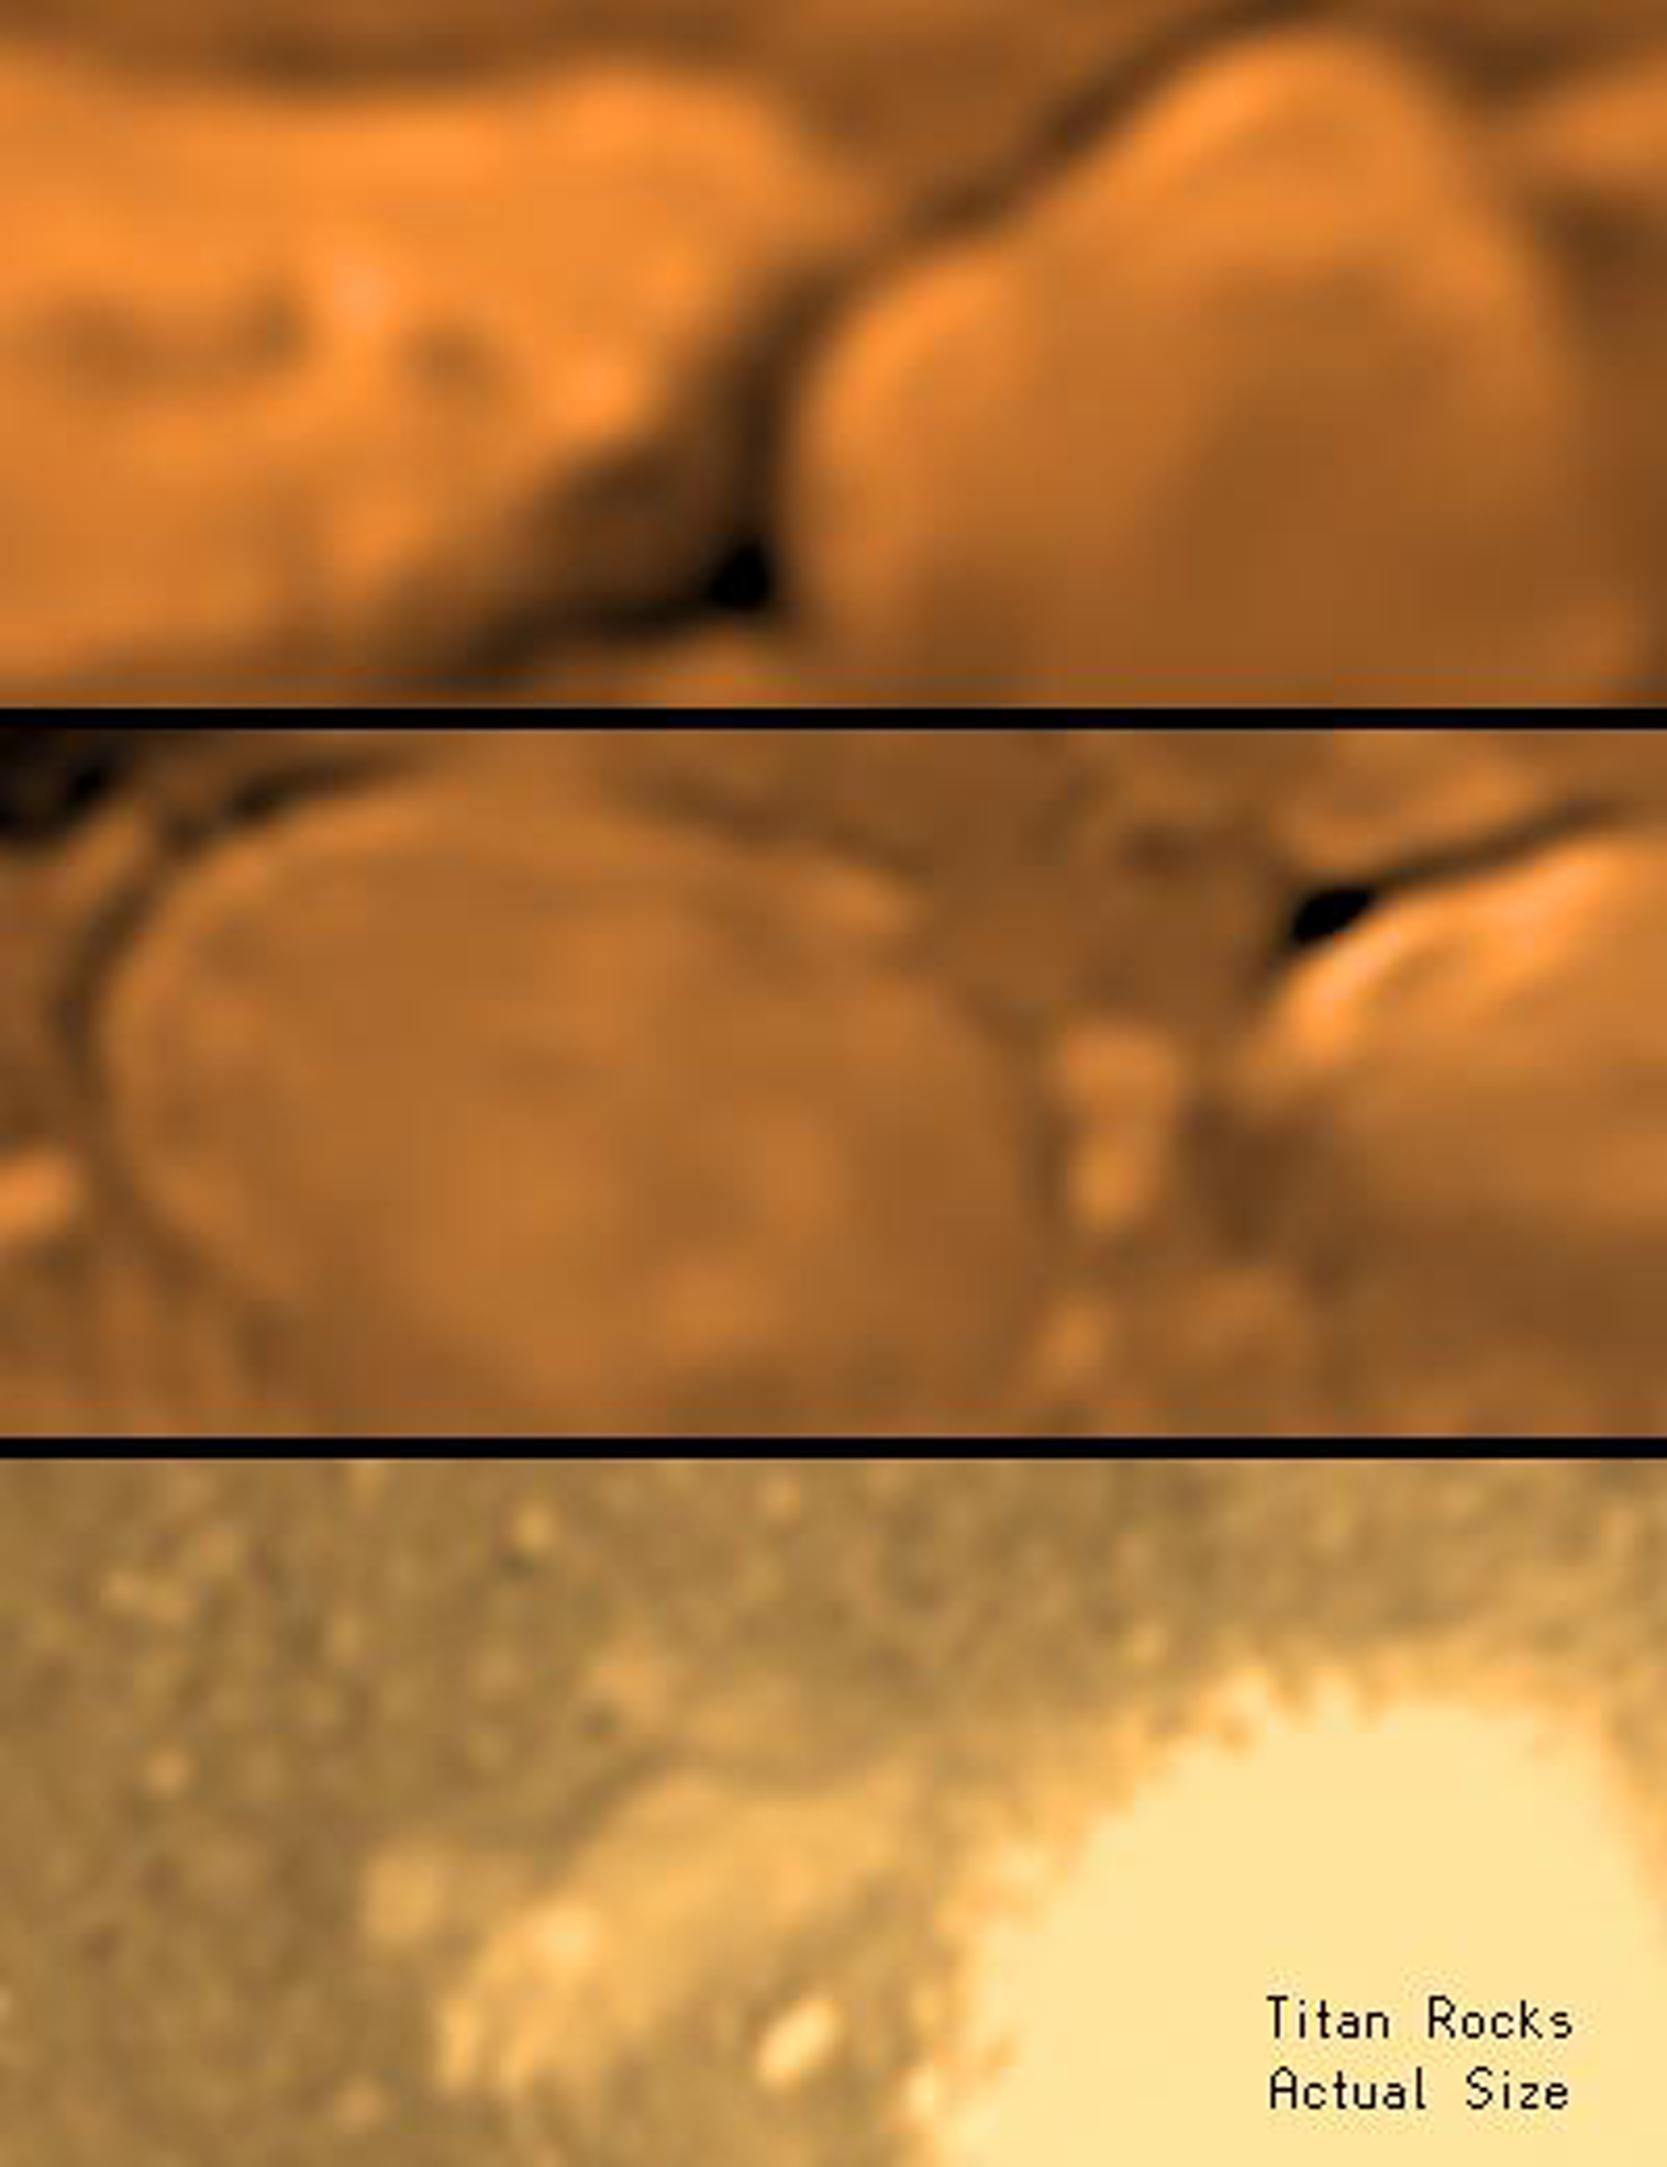 When printed on letter sized paper this poster shows the size of the 'rocks' on Titan's surface in their true size.